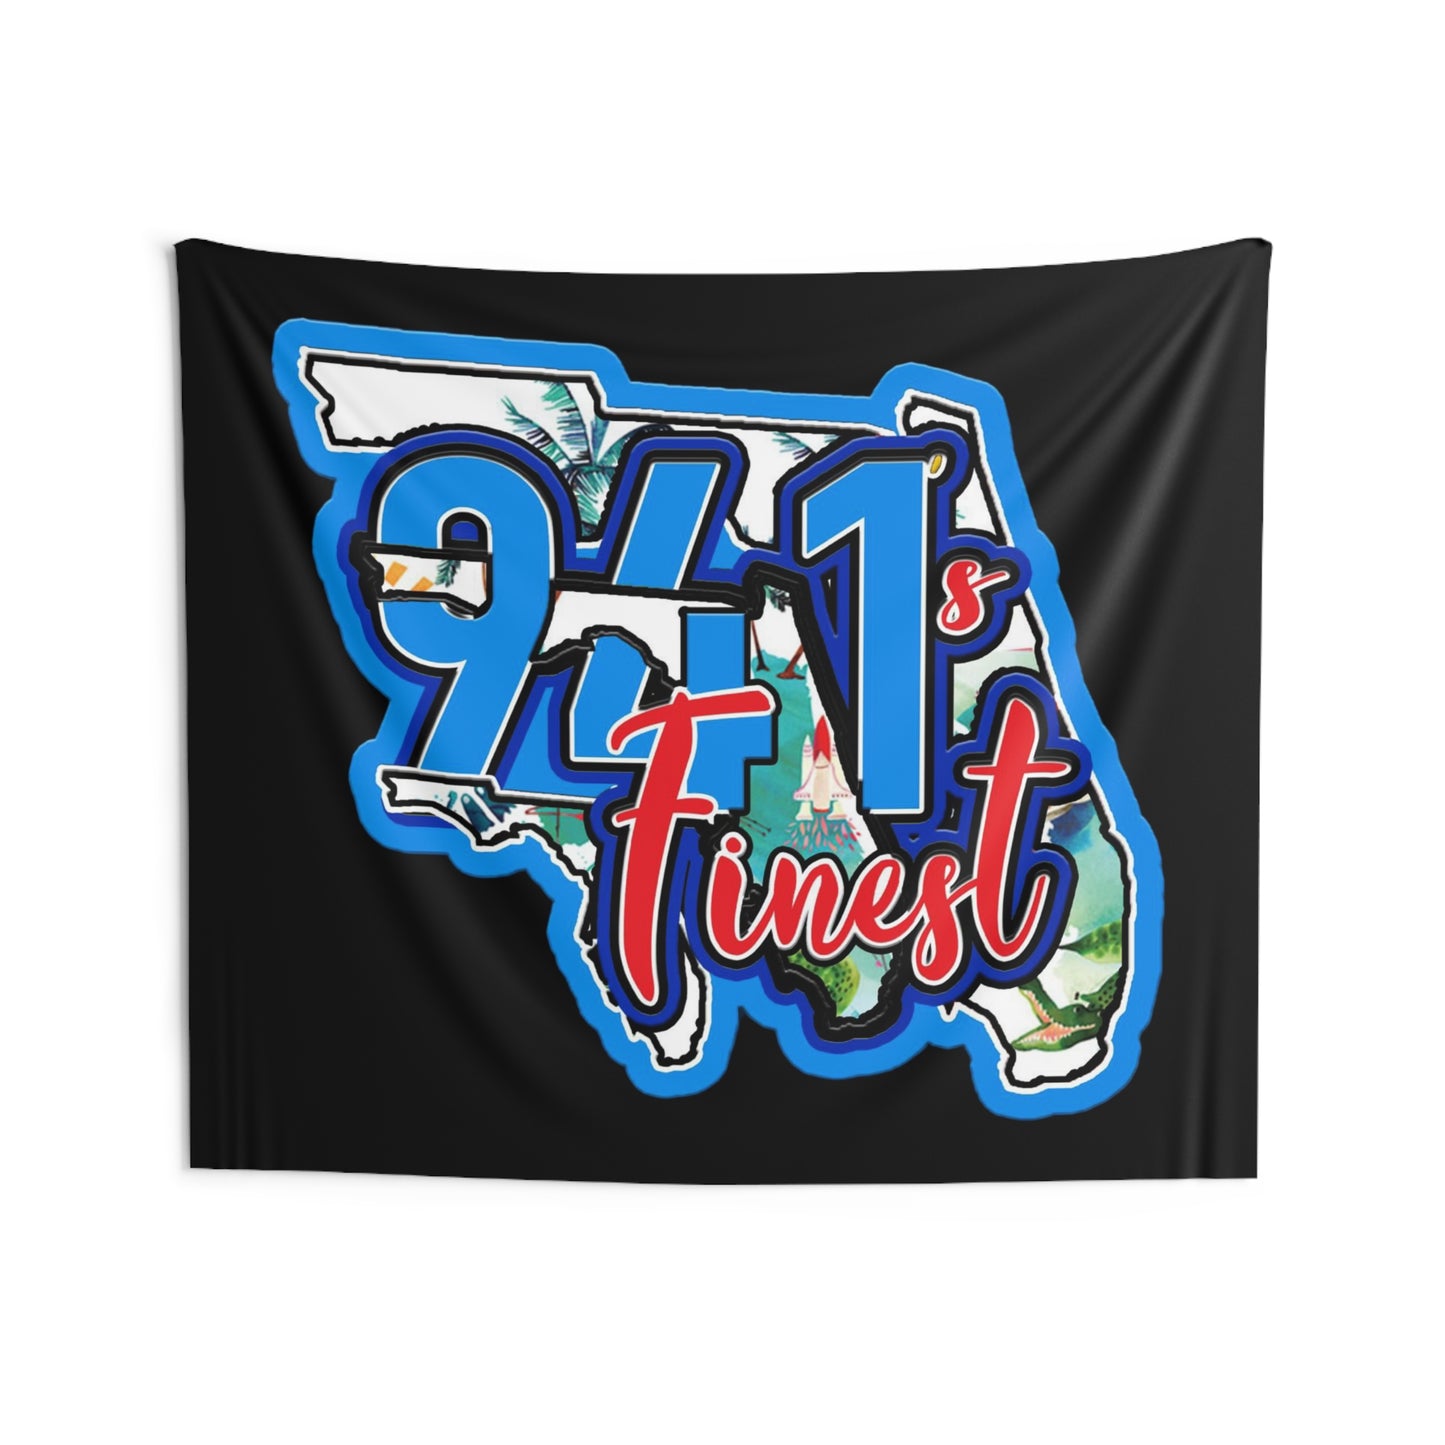 941’s Finest Indoor Wall Tapestry (Flag design)